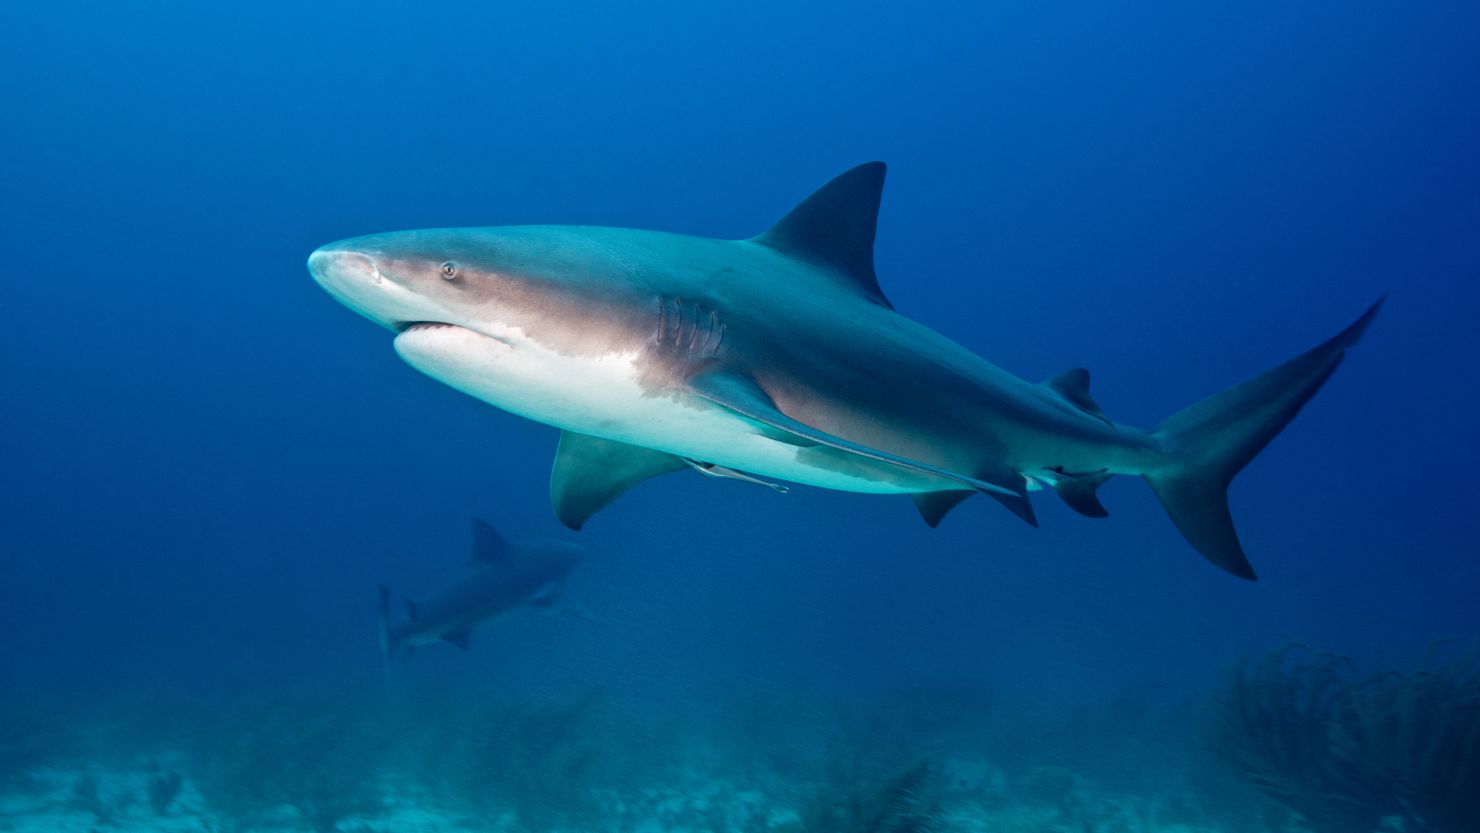 Researchers electronically tagged bull sharks with a transmitting locator device, which recorded the depth and temperature of the part of the ocean they swam to.